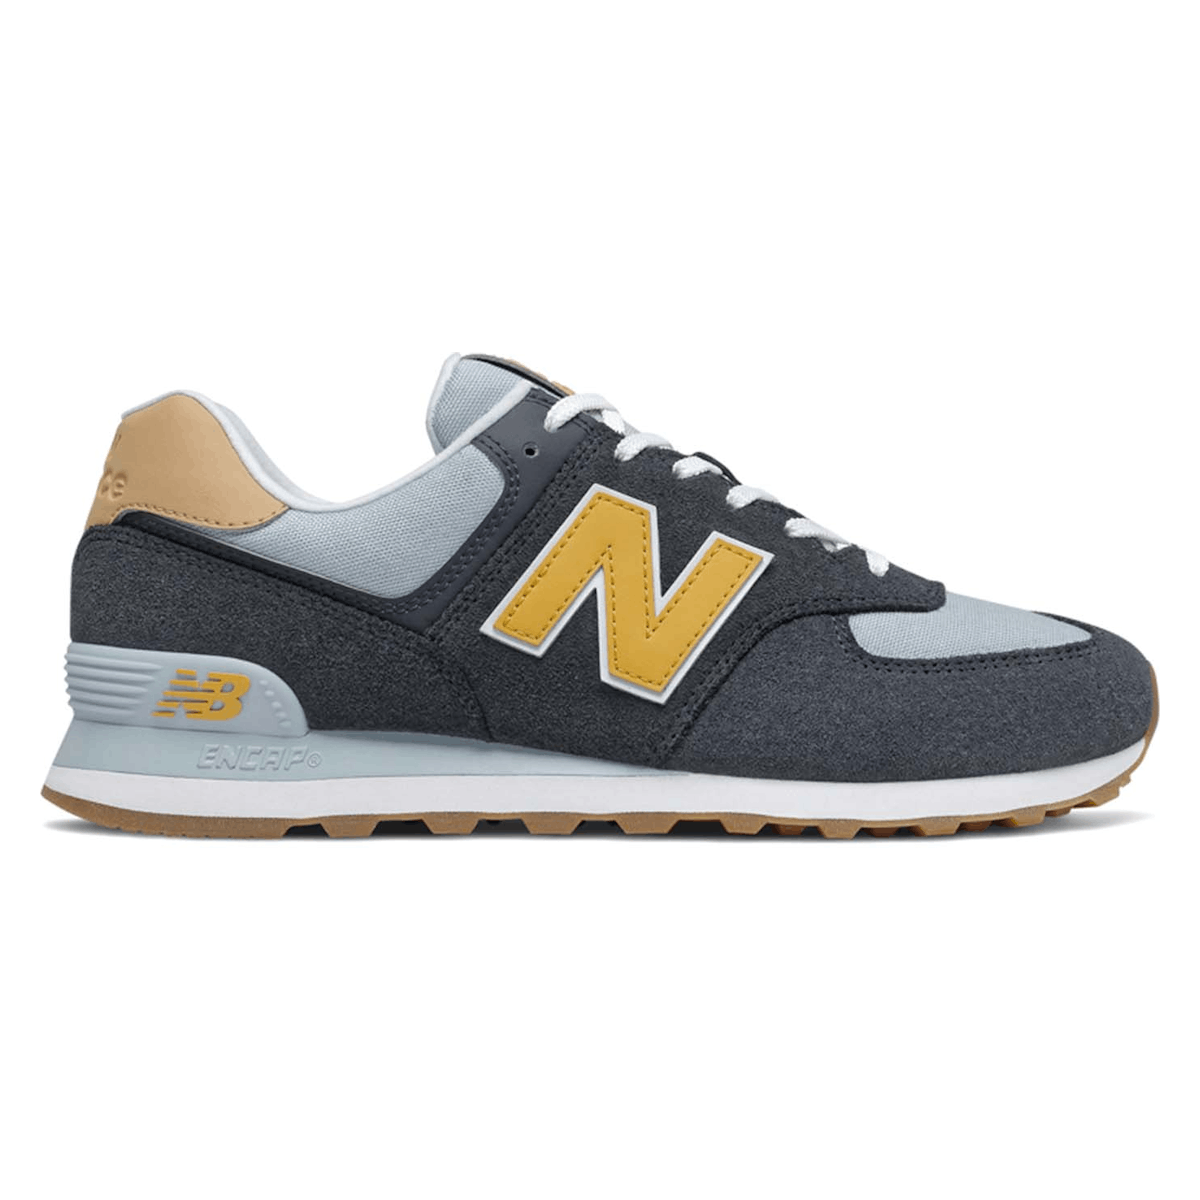 New Balance 574 Outerspace Varsity Gold